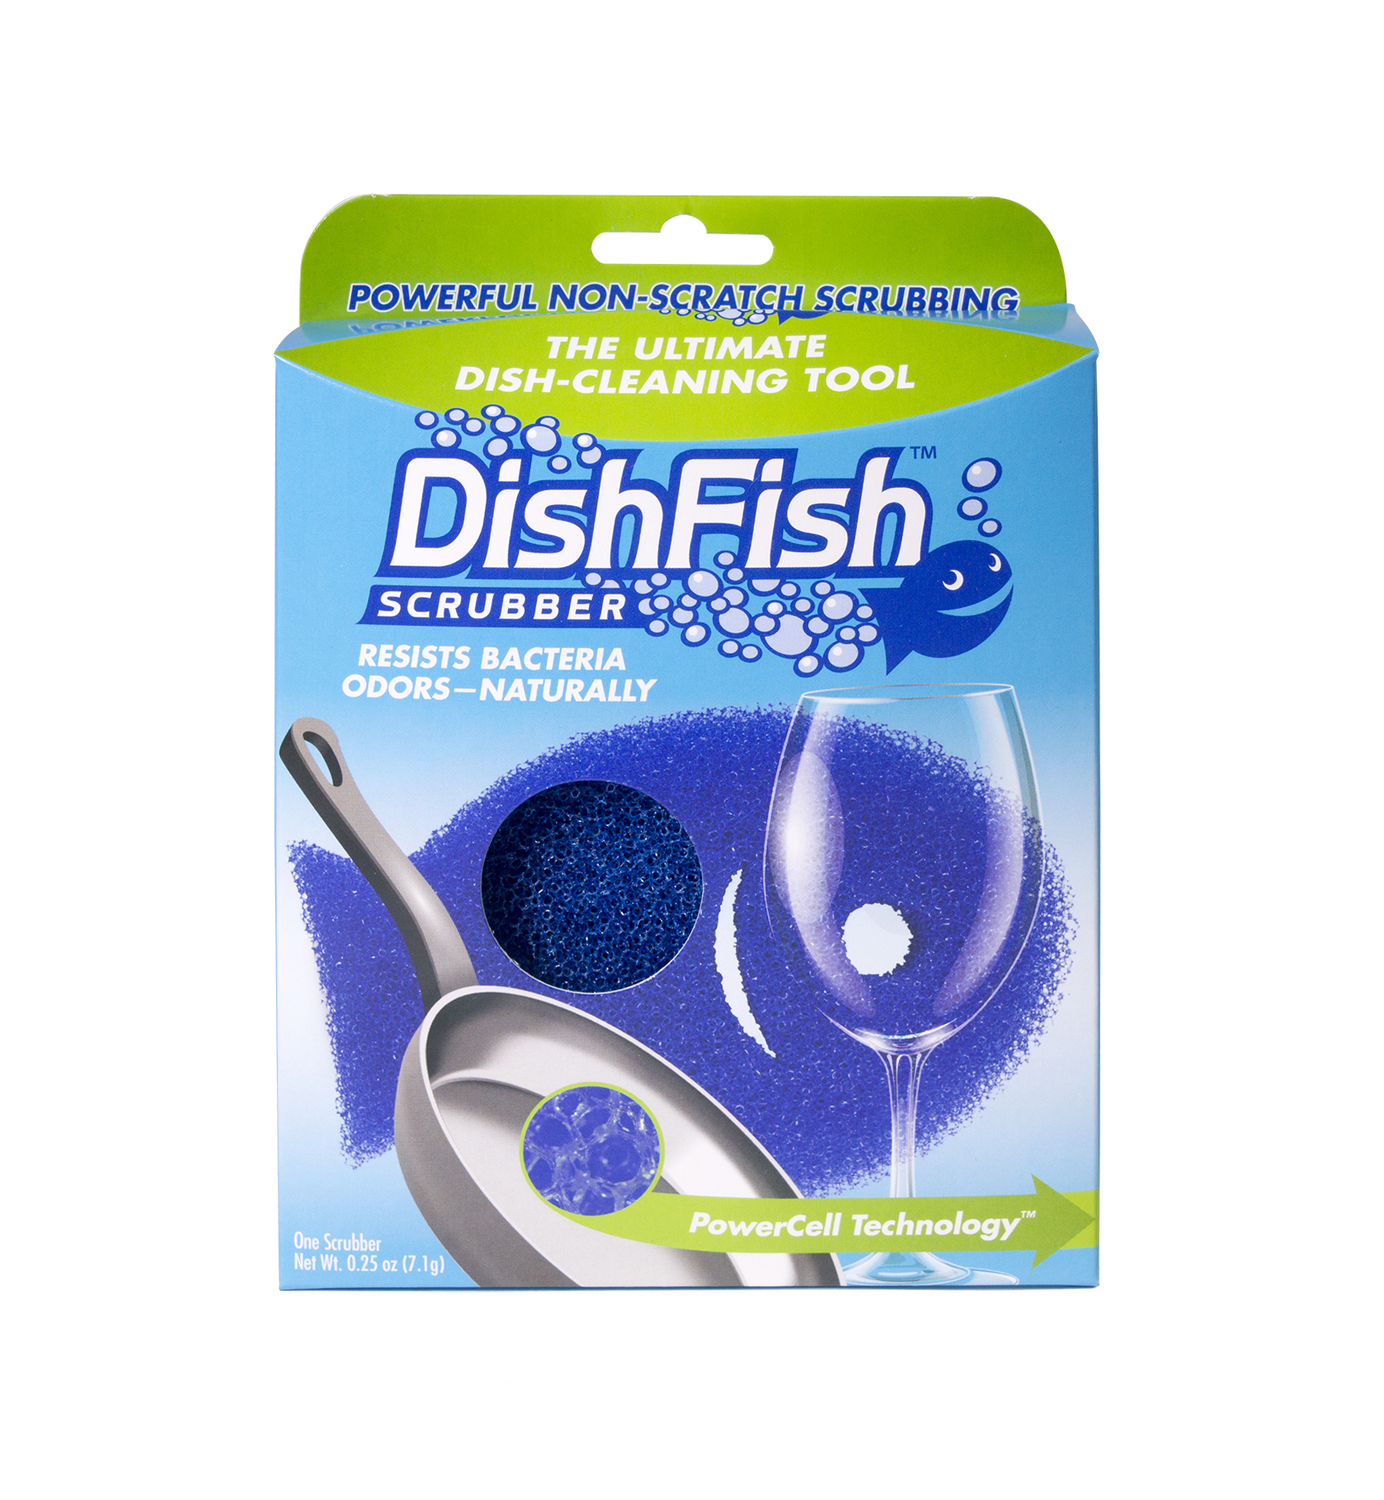 dish-fish-scrubber-1pack-front.jpg